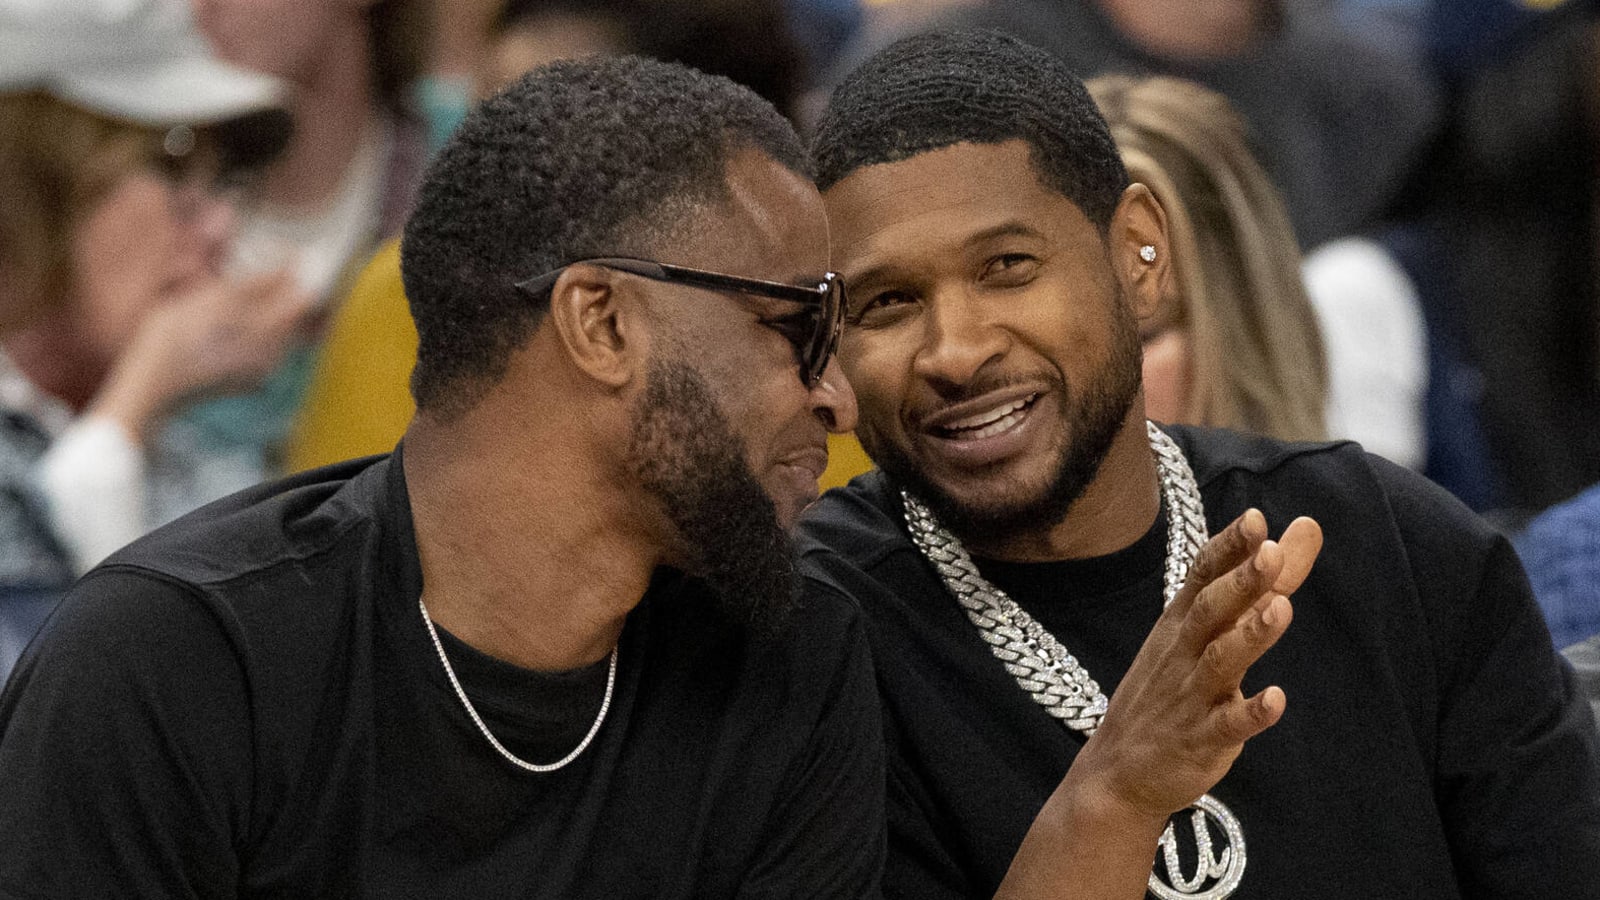 Tee Morant, Usher go viral at Grizzlies-Timberwolves game